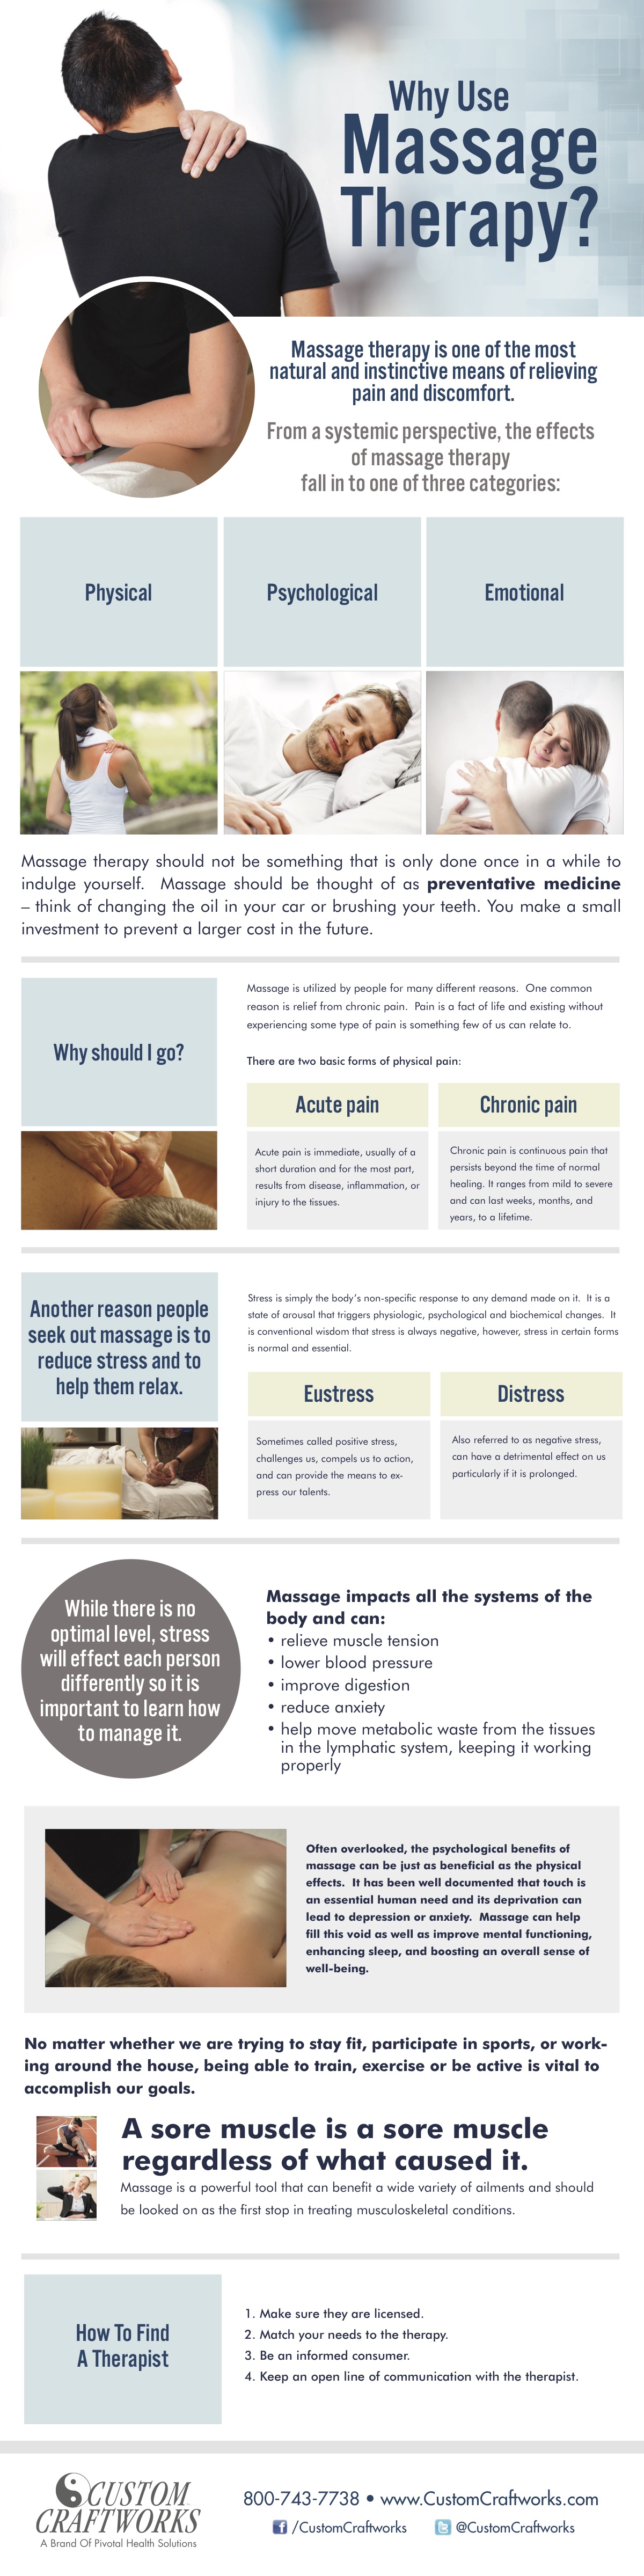 WhyMassageTherapy_infographic_CCW (1).jpg